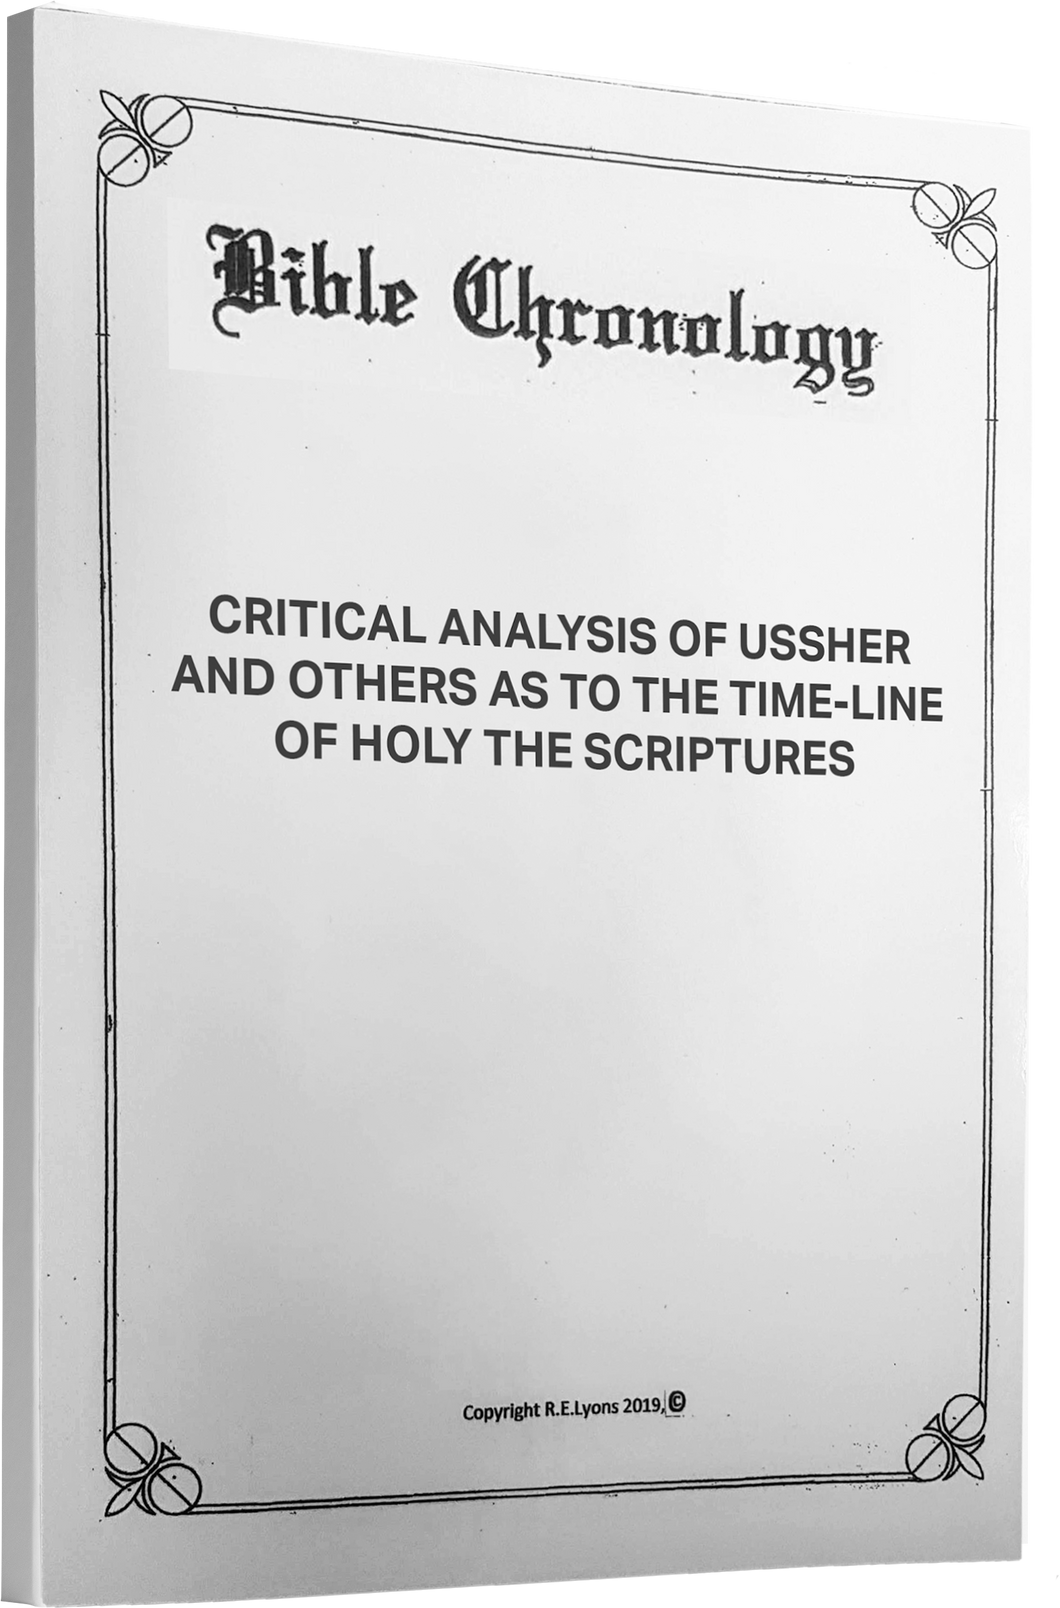 Critical Analysis of Ussher and Others